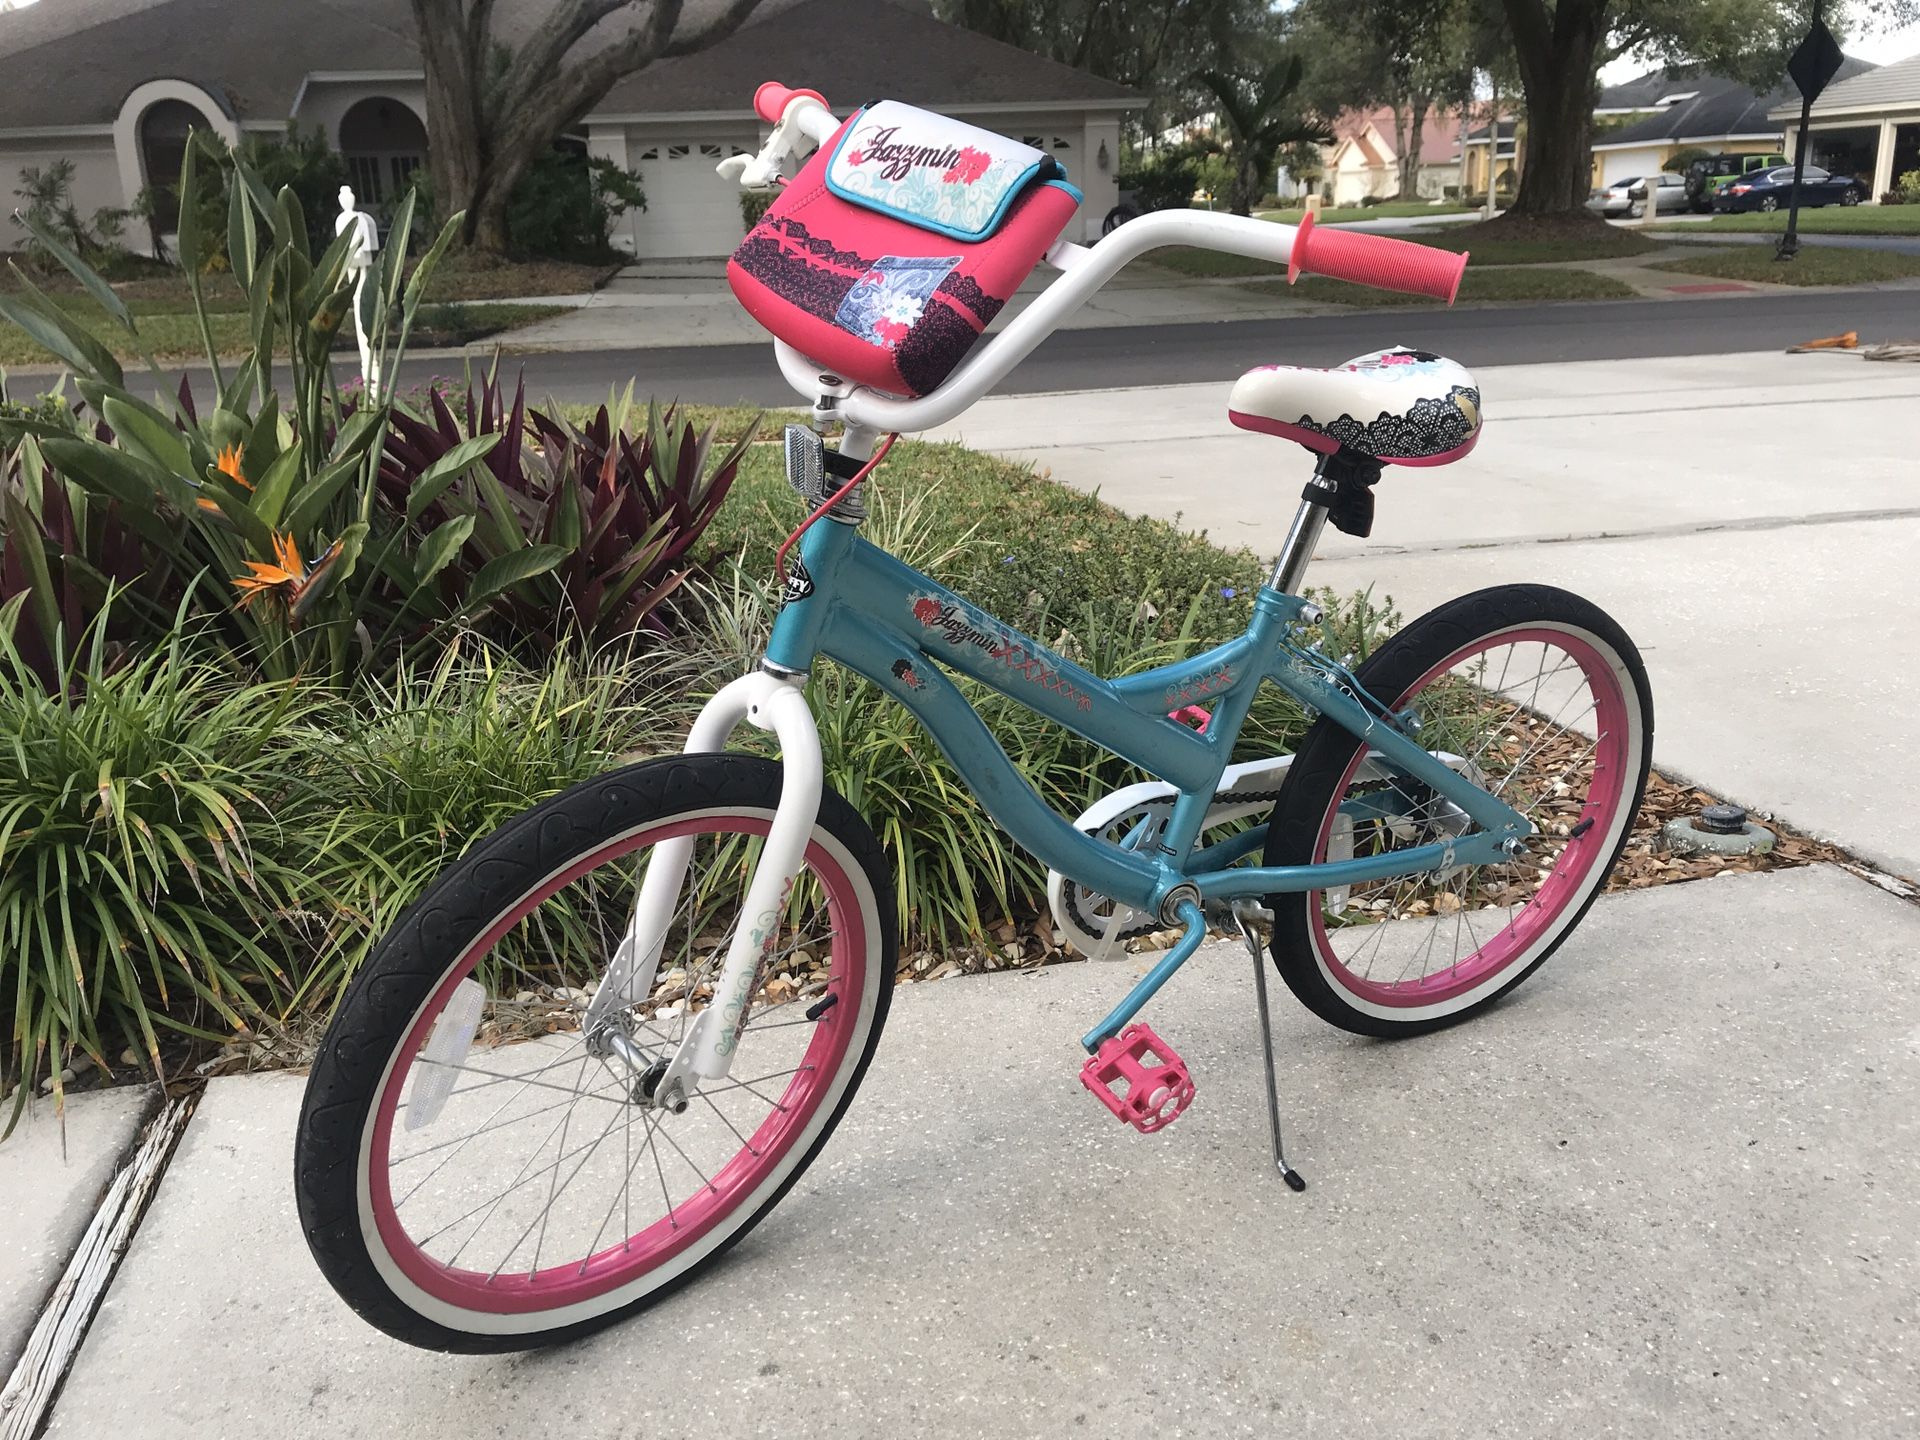 Huffy girls bike. 20” tires. Seat is worn a bit (see picture) otherwise in fine condition. Has a handlebar bag that attaches or removed with Velcro